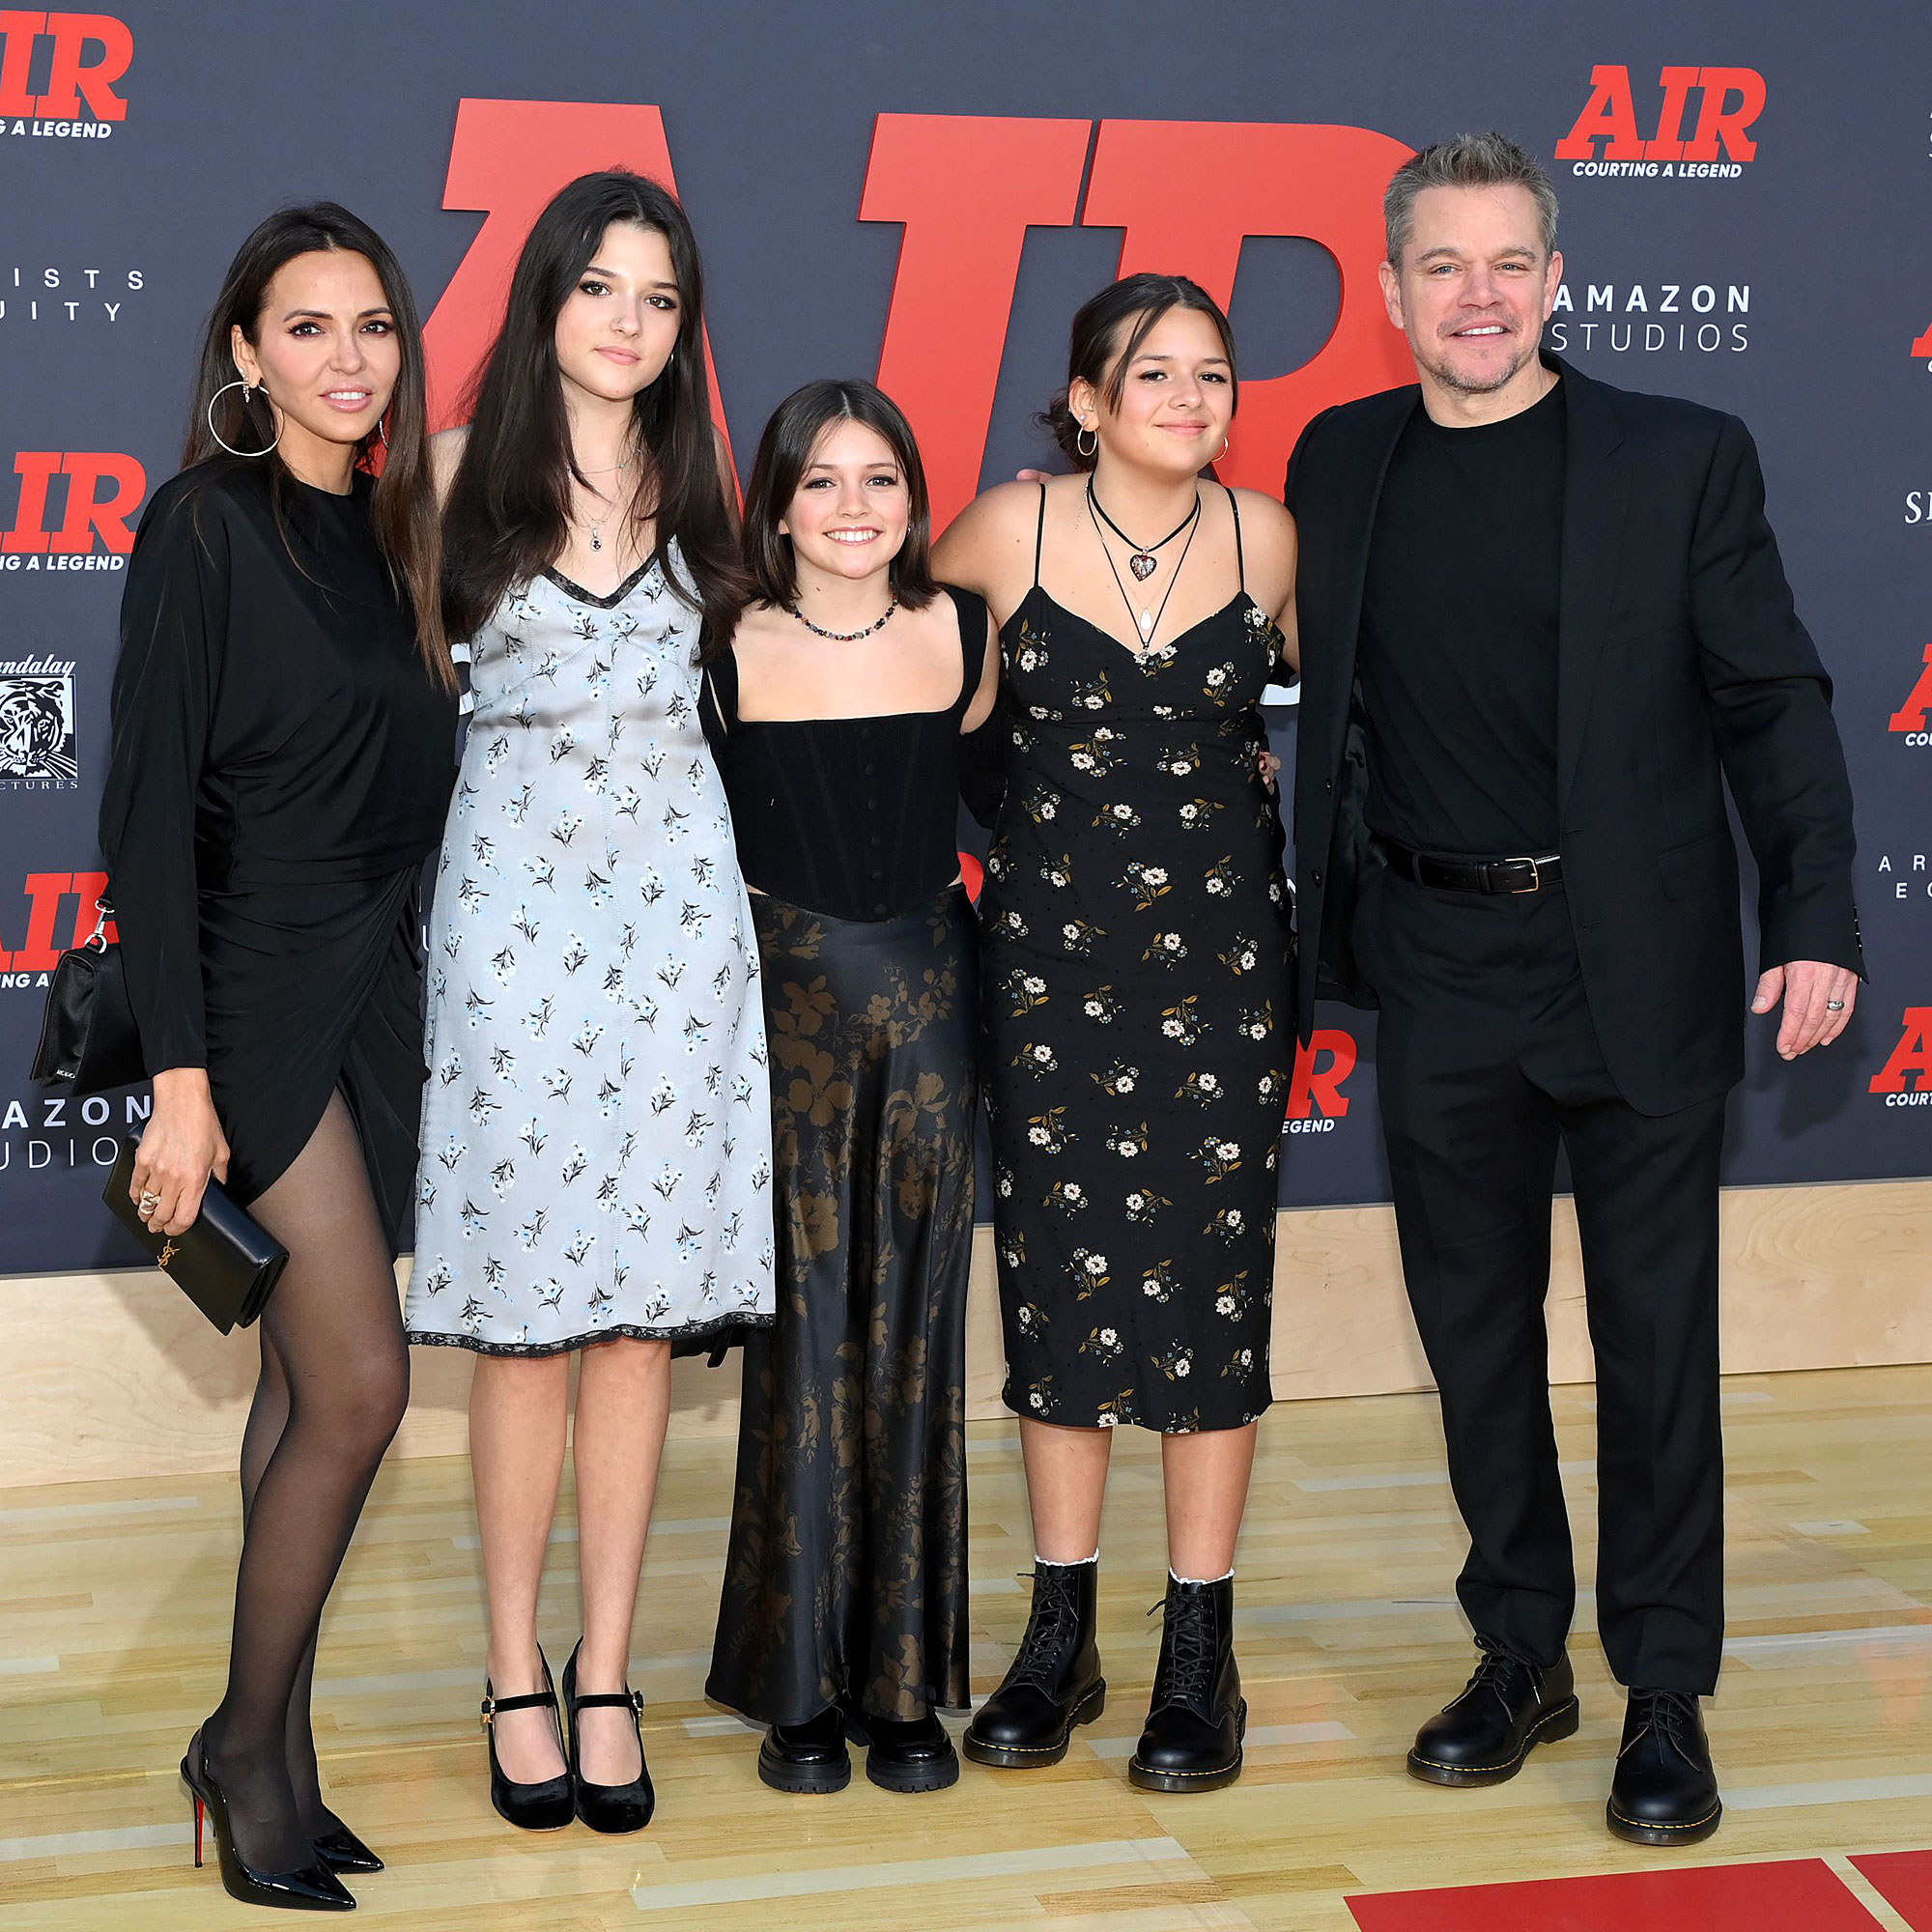 Matt Damon Poses With 3 Daughters at 'Air' Premiere Photos